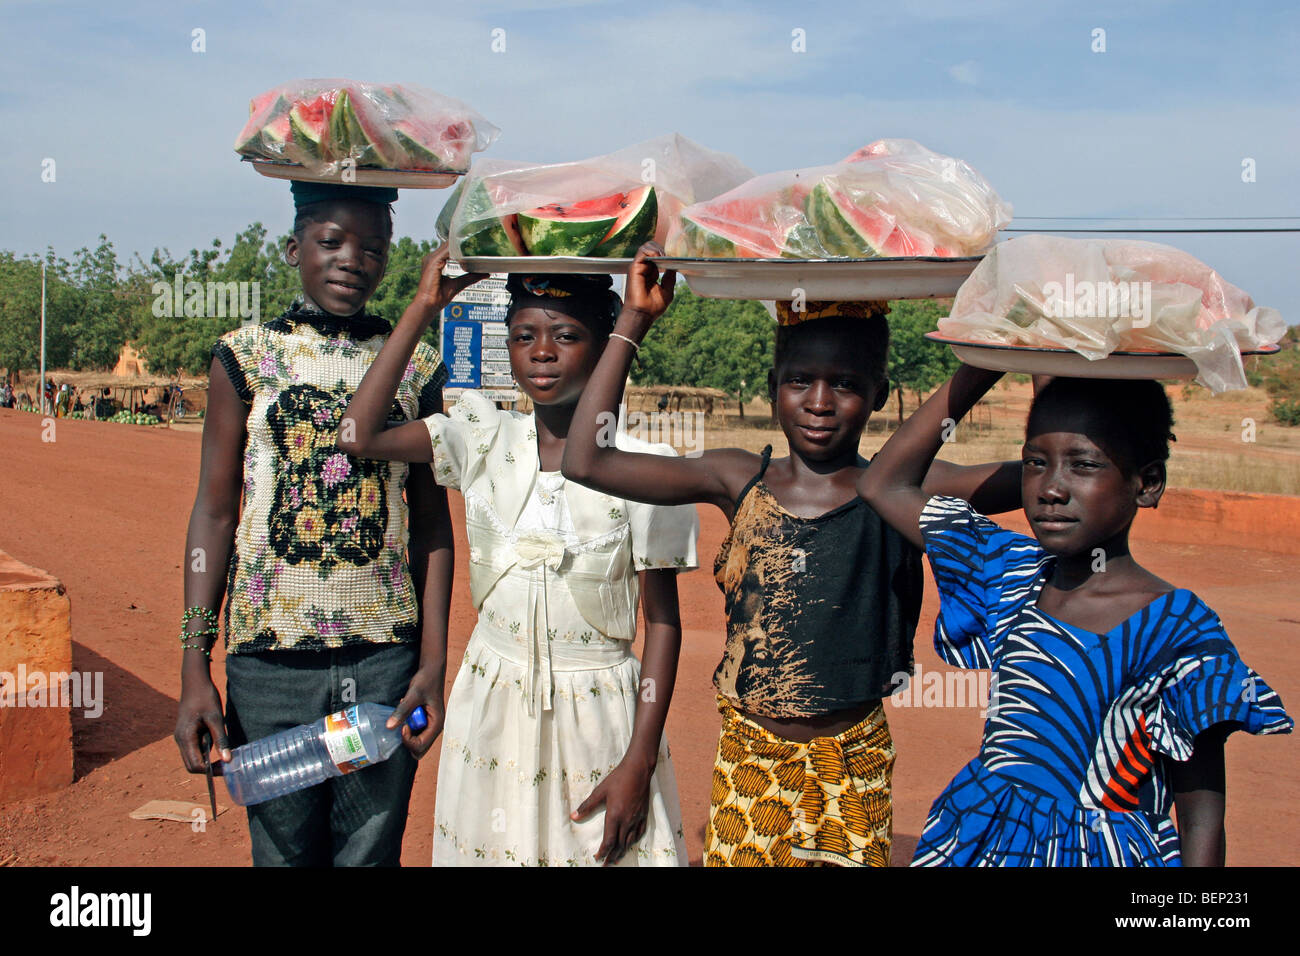 Black children carrying fruit on their heads along dirt road, Sahel, Mali, West Africa Stock Photo